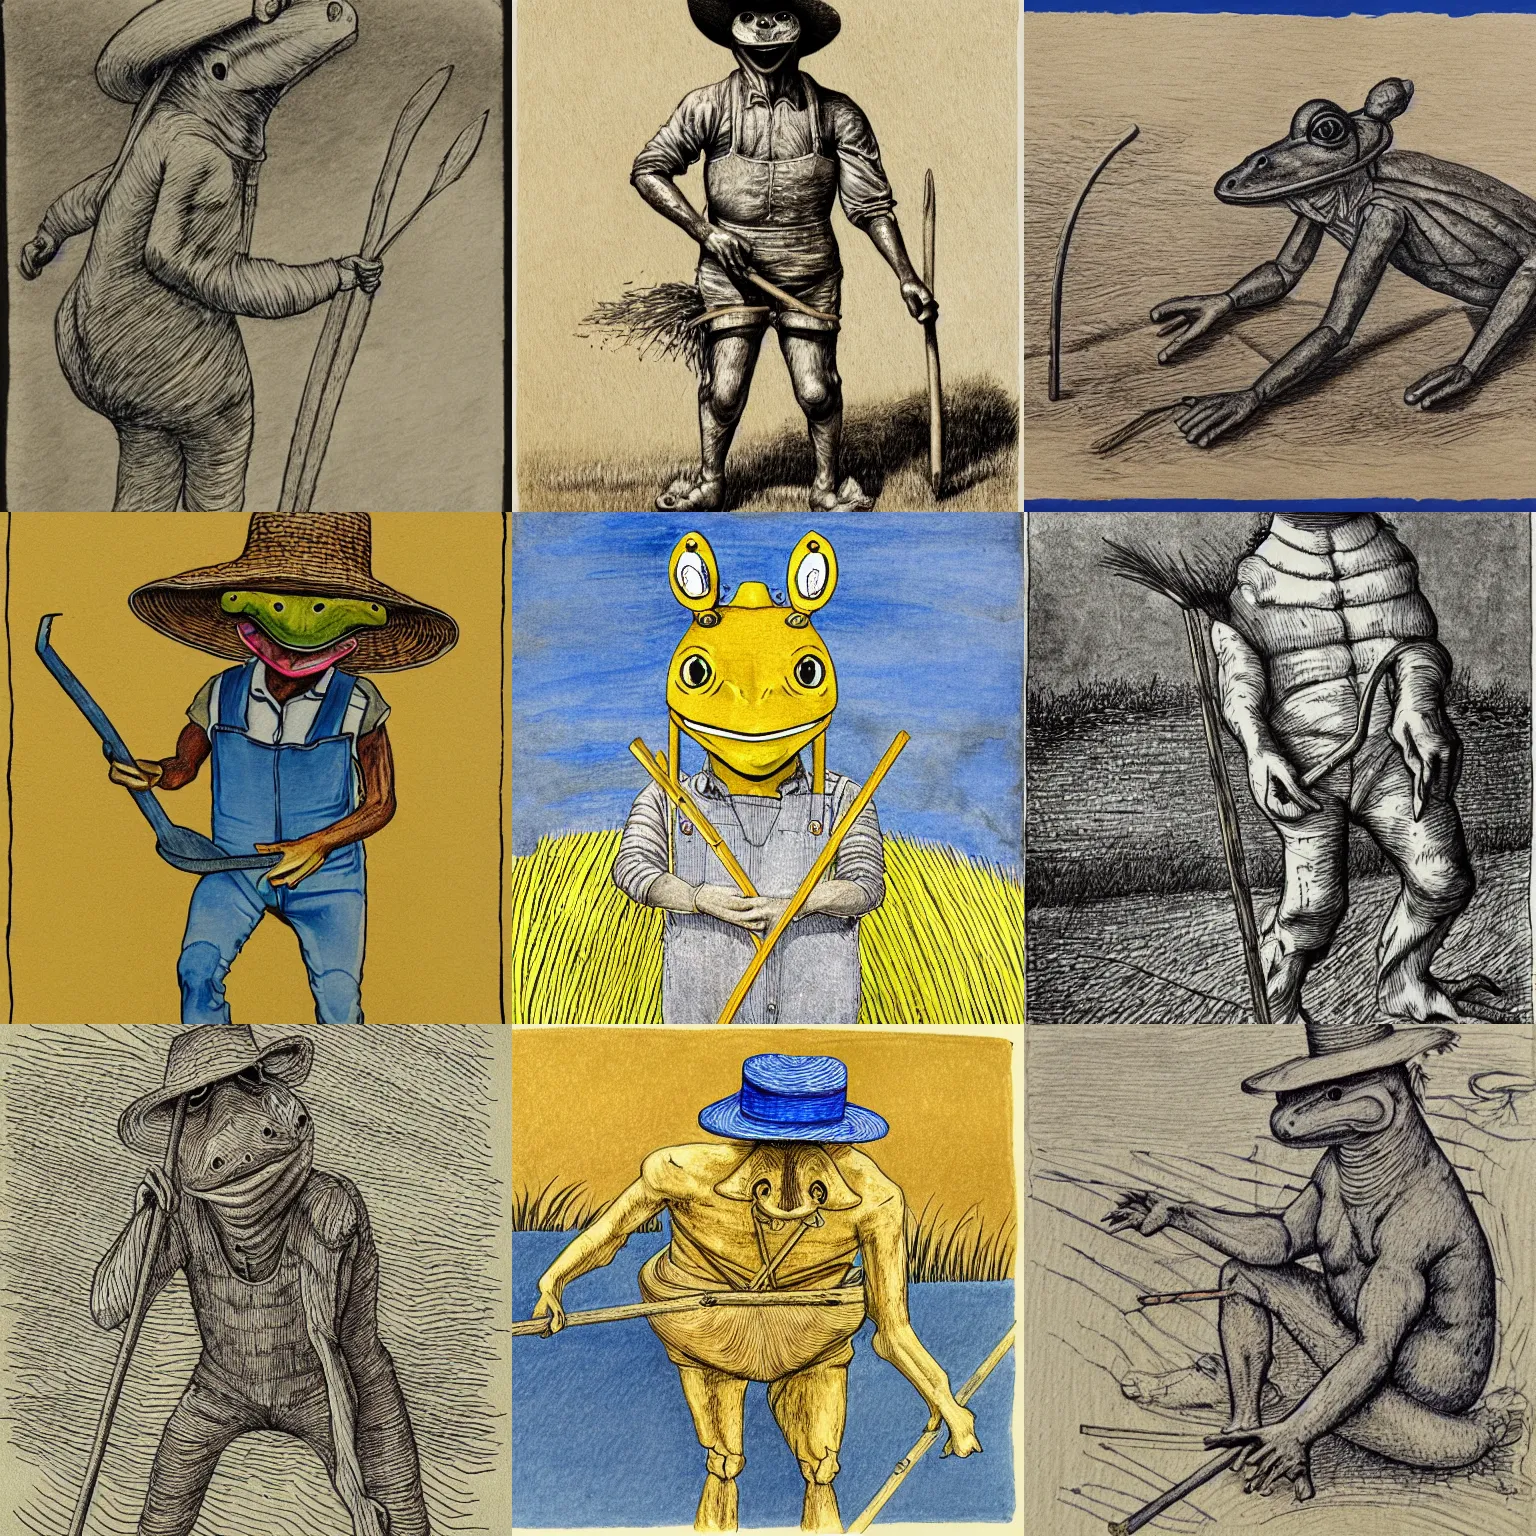 Prompt: horse - headed humanoid frog - person creature, wearing a straw hat and overalls, using a spade, golden hour, bucolic, expressive linework, crosshatching, grisaille, cobalt blue and ochre watercolor wash